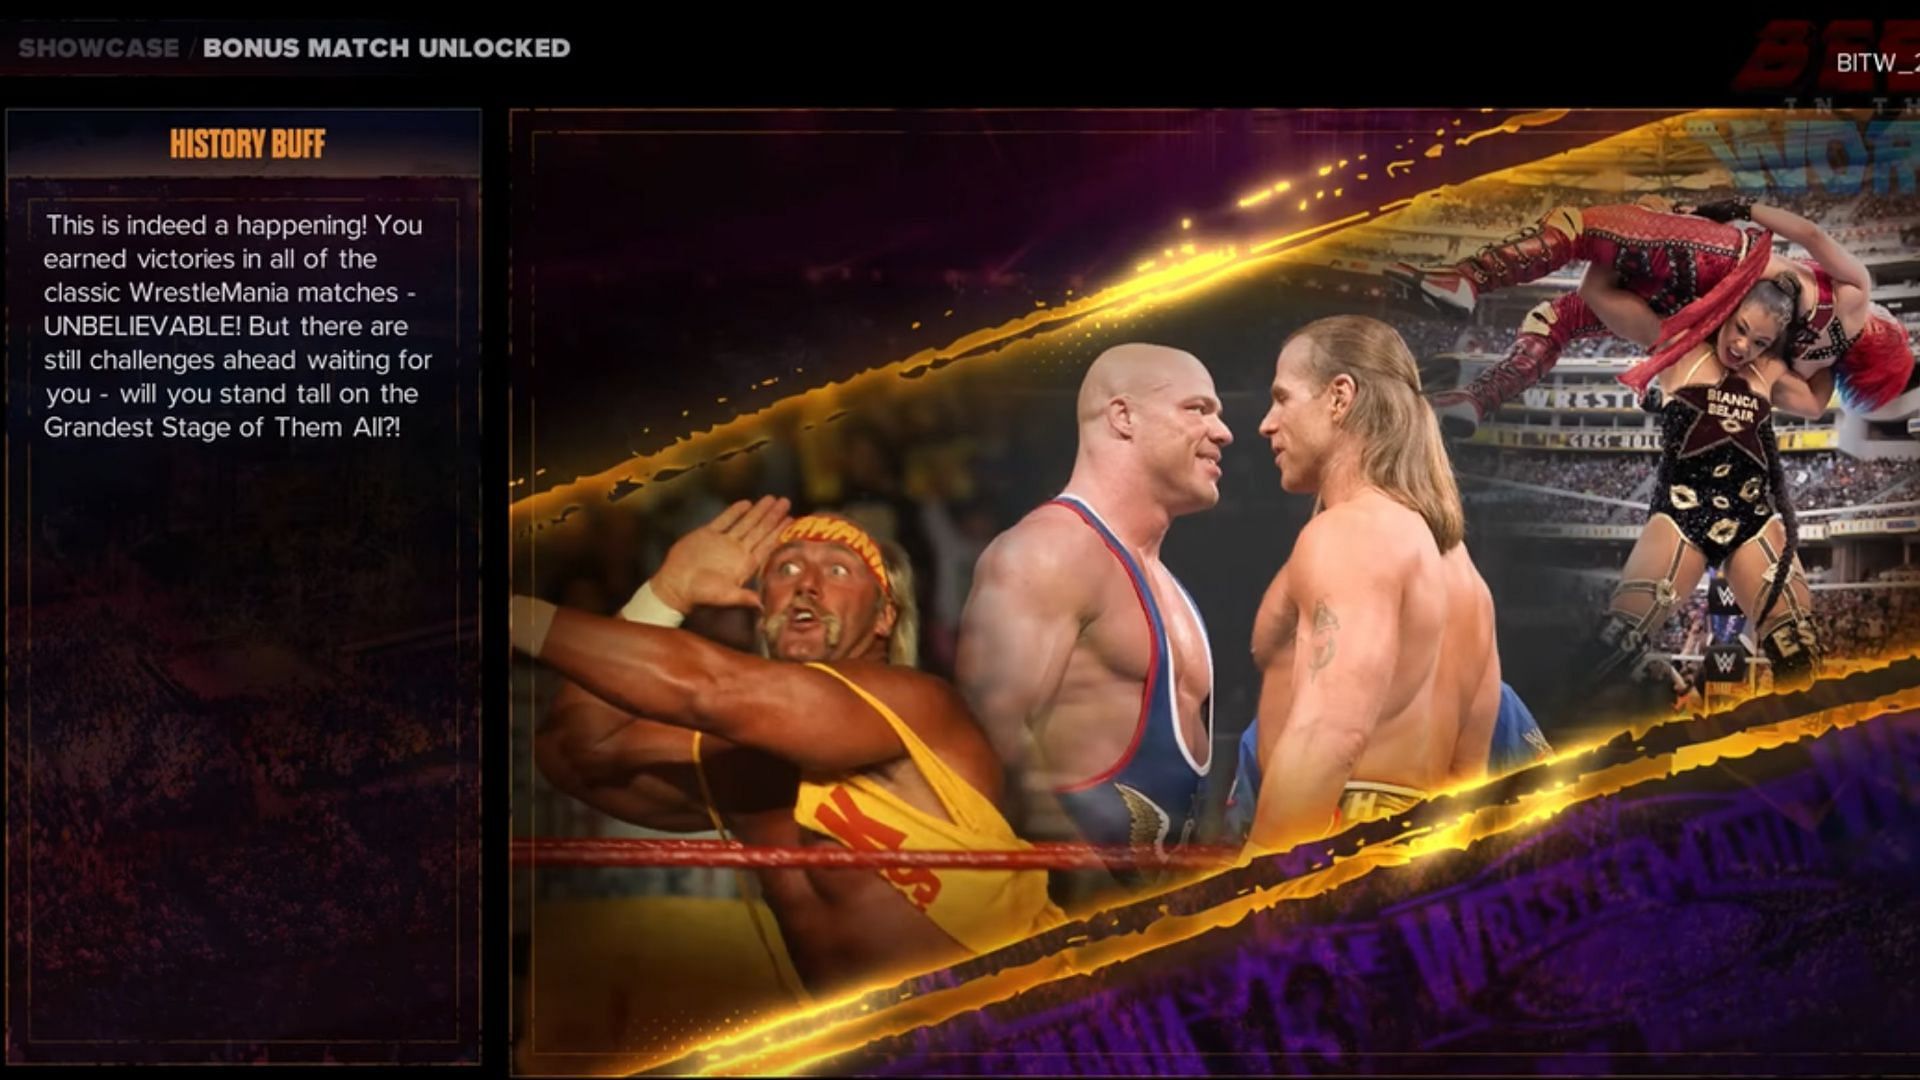 Win all the matches in the Showcase Mode to unlock the Bonus Match (Image via YouTube/Bestintheworld)